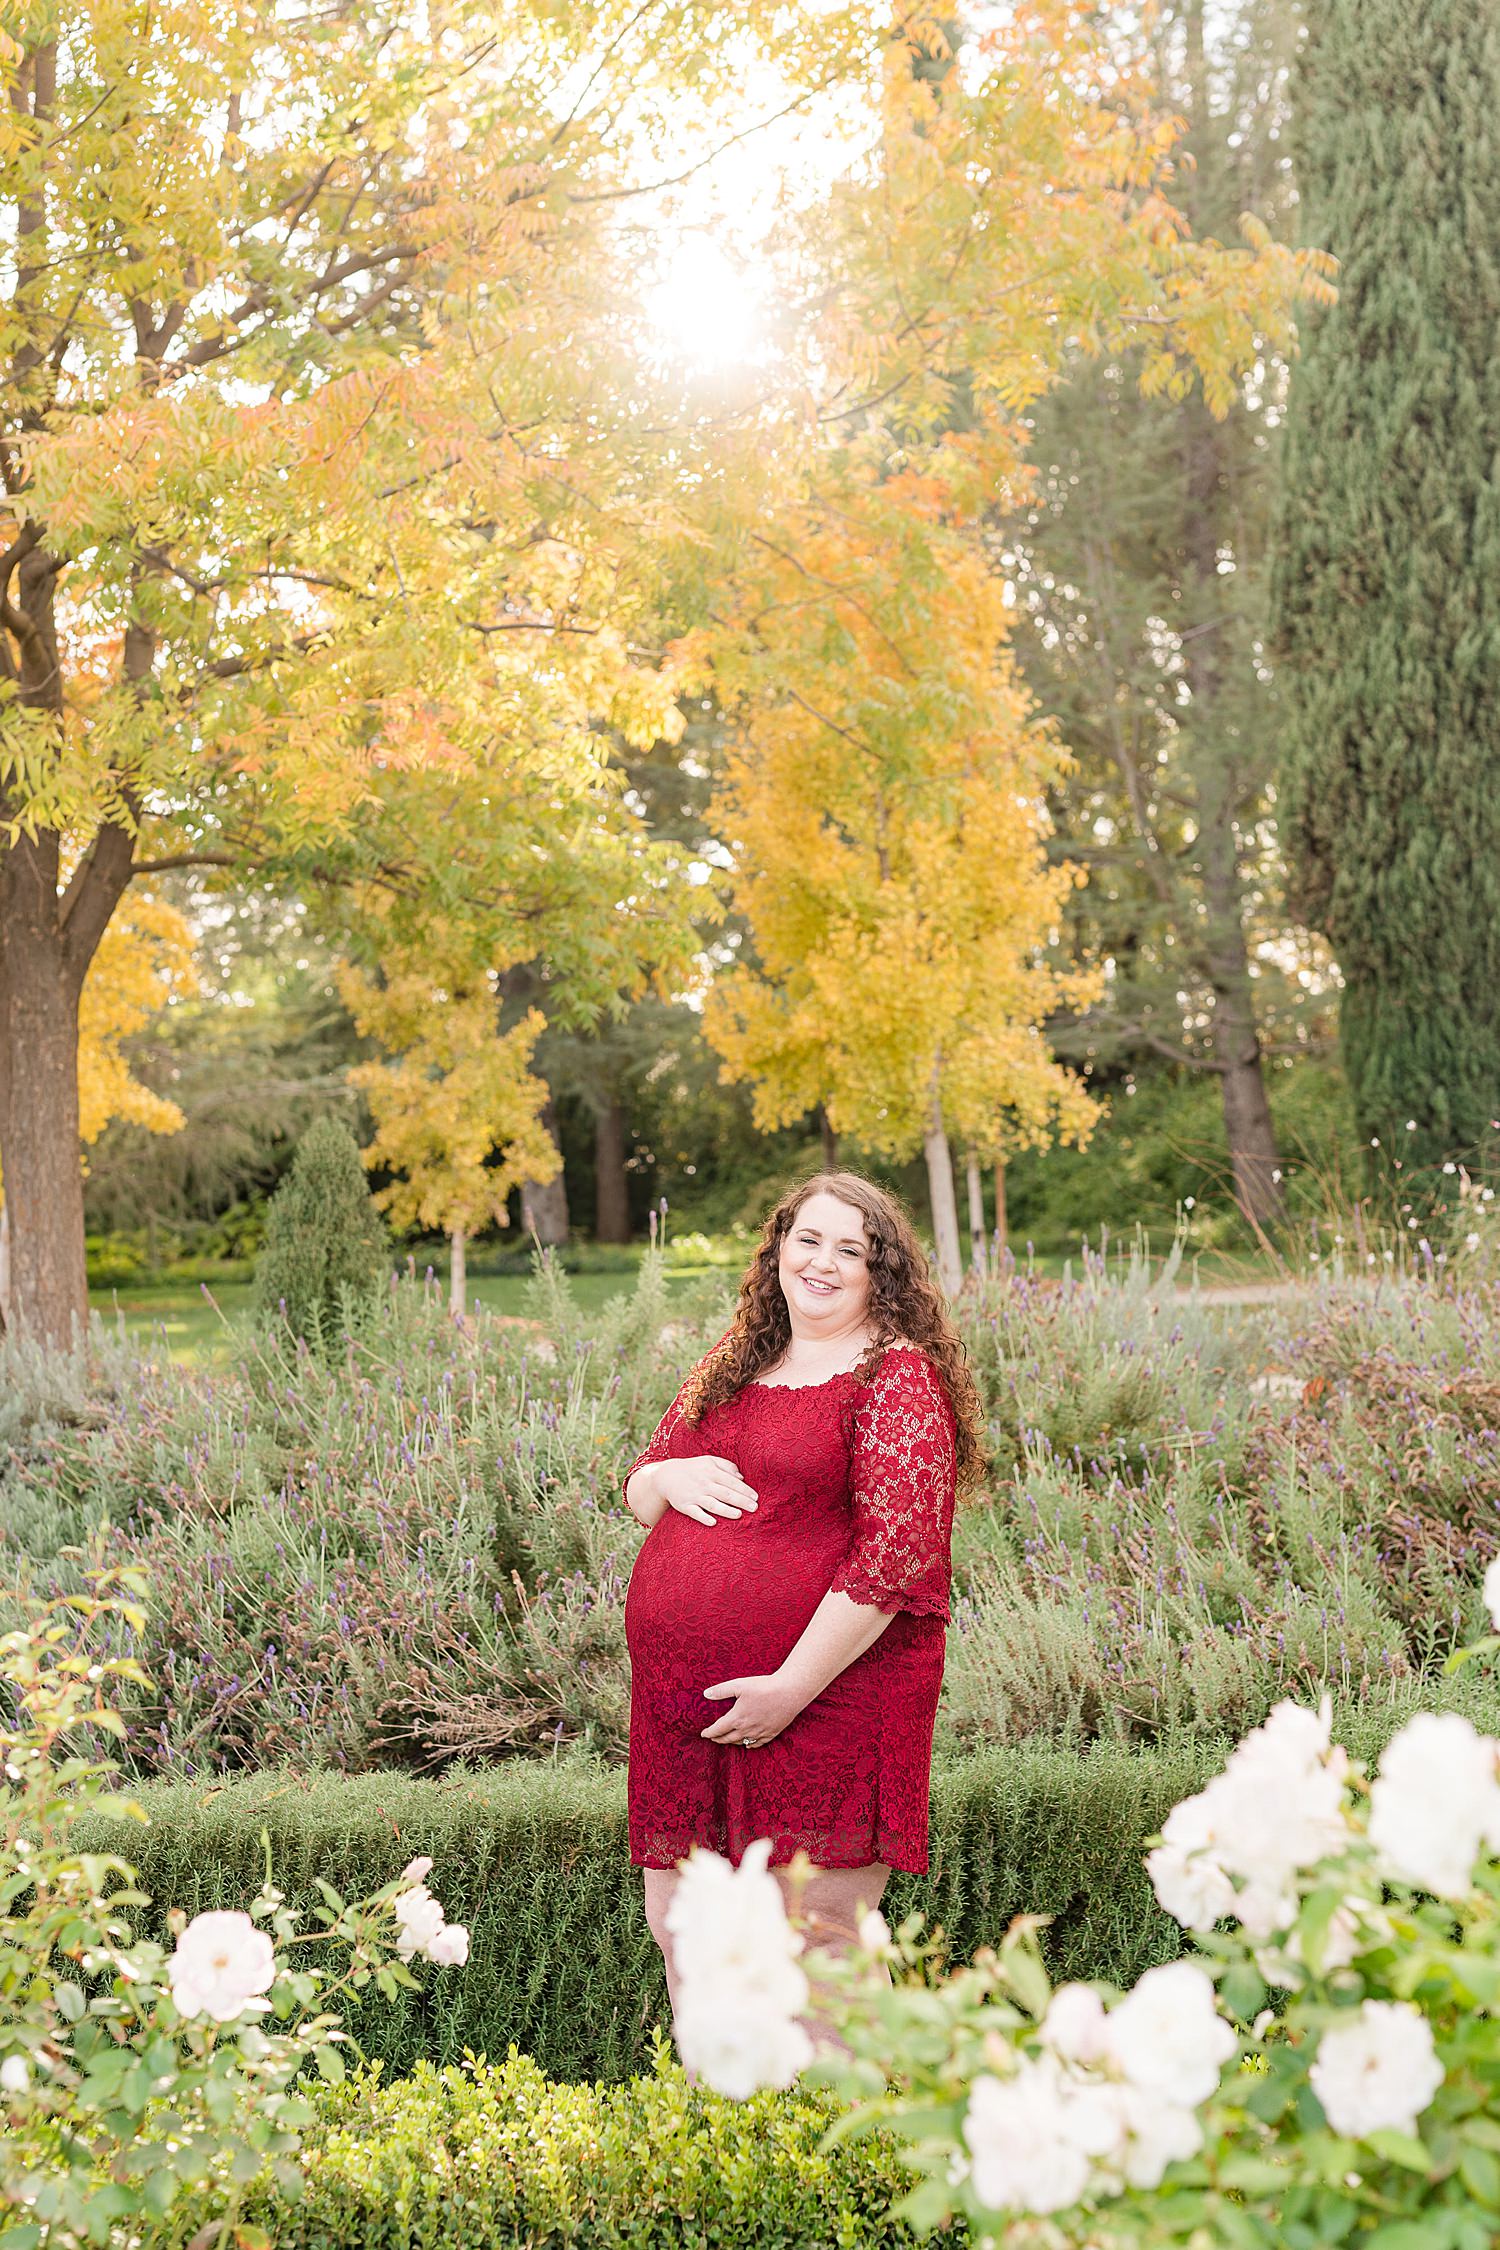 Park Winters Maternity Portraits at the Park Winters Wedding Venue by Adrienne and Dani Photography